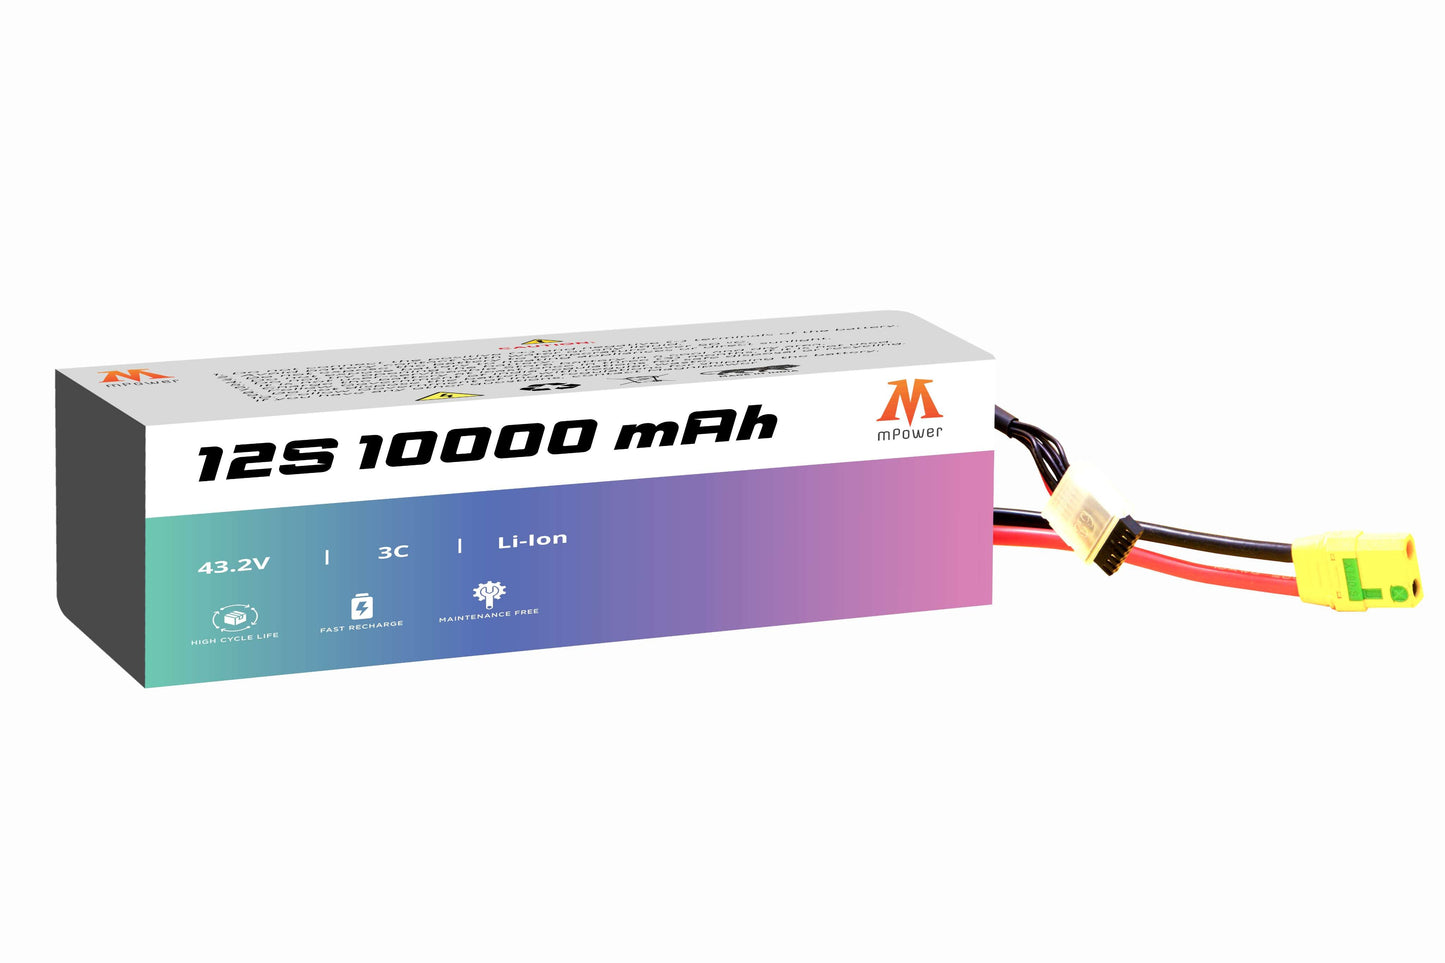 mPower 12S 10000mAh Lithium-Ion Battery for Survey Drones-mpowerlithium